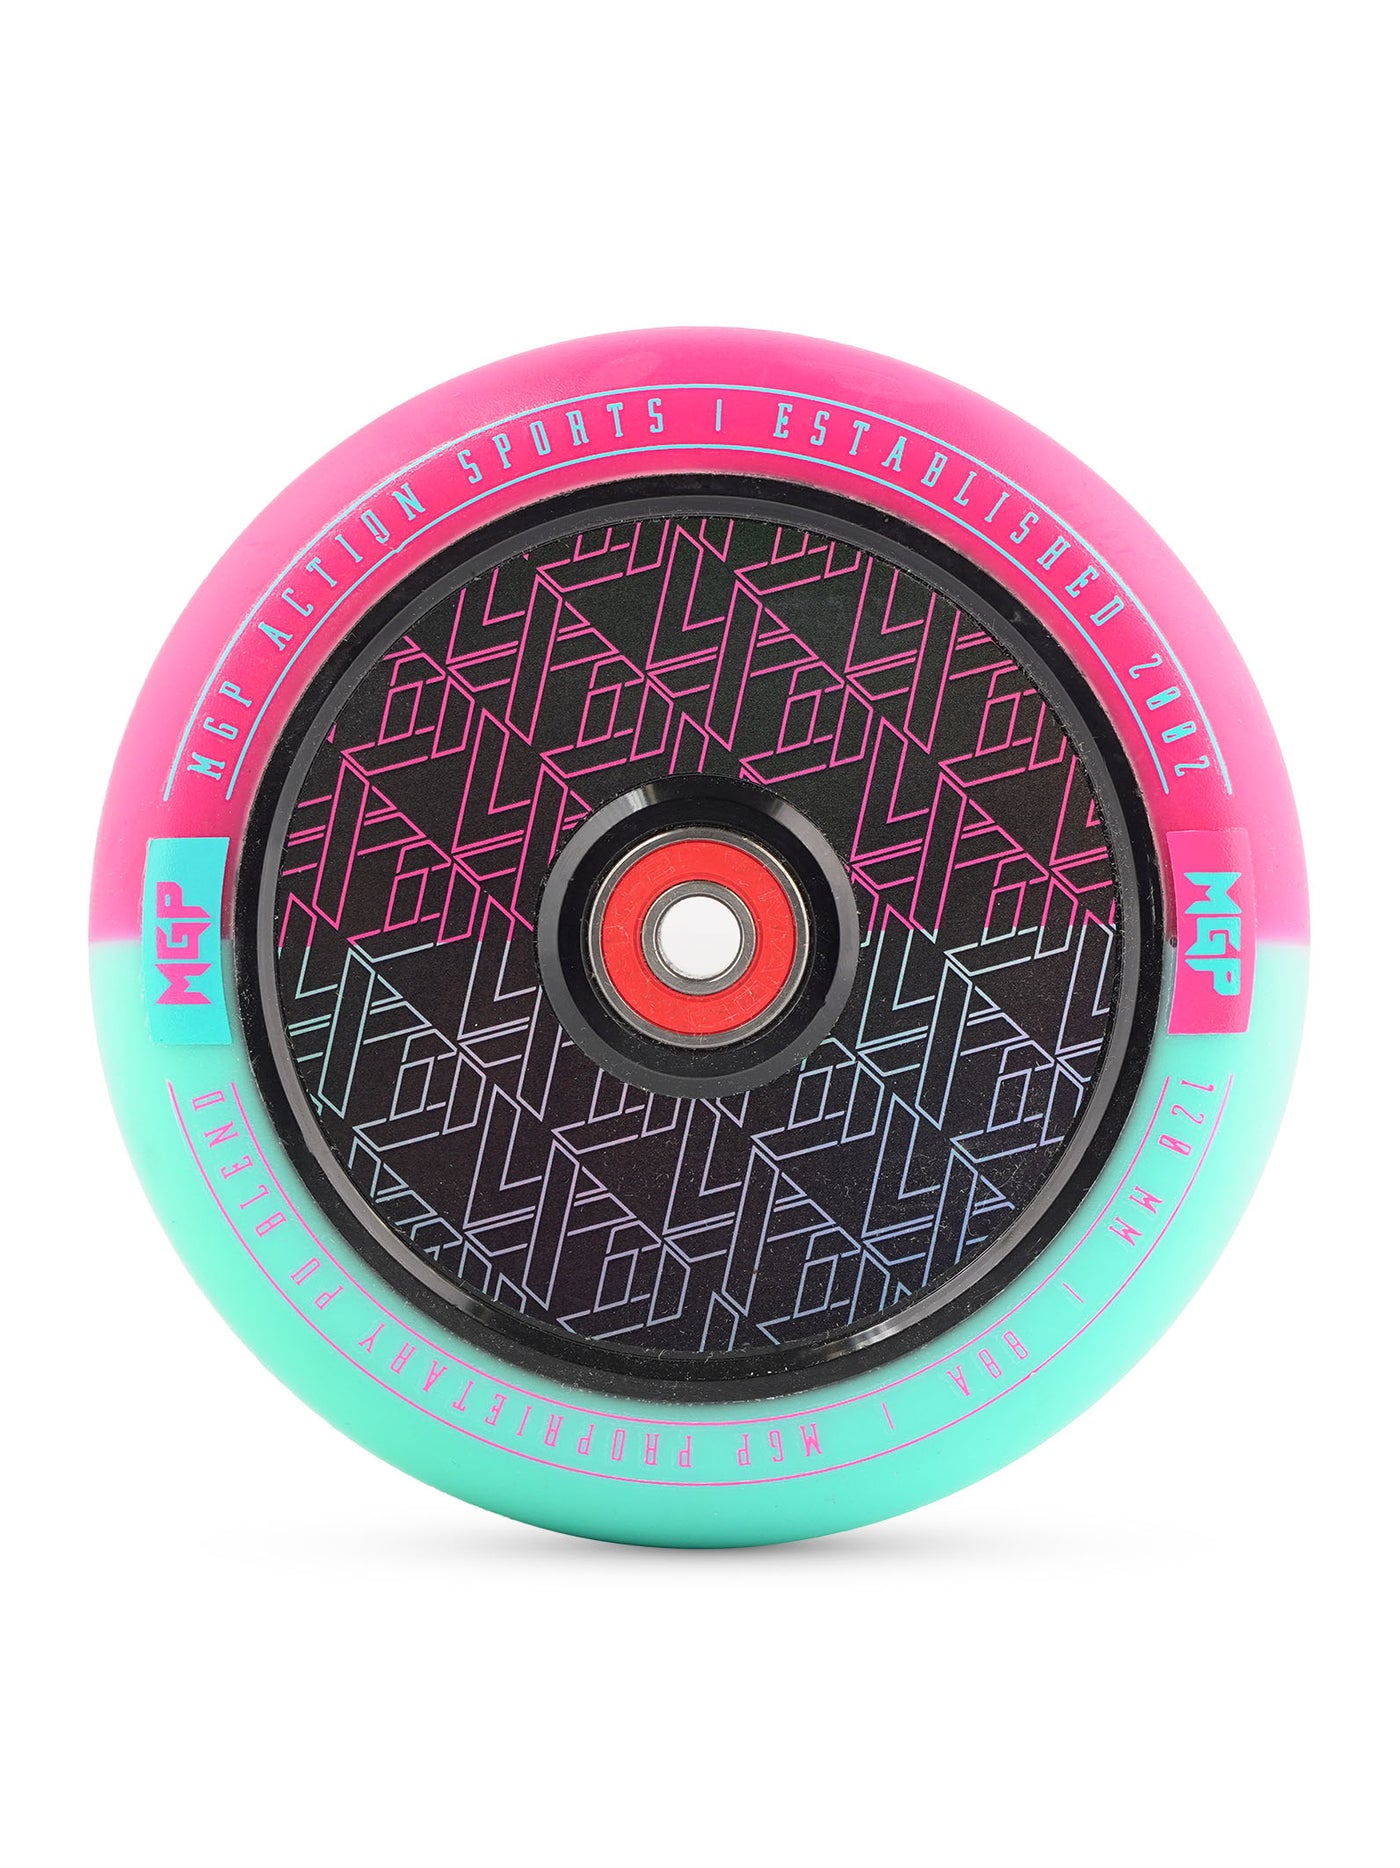 mgp pro scooter wheels replacement pink blue fast bearings abec-9 trick 120mm